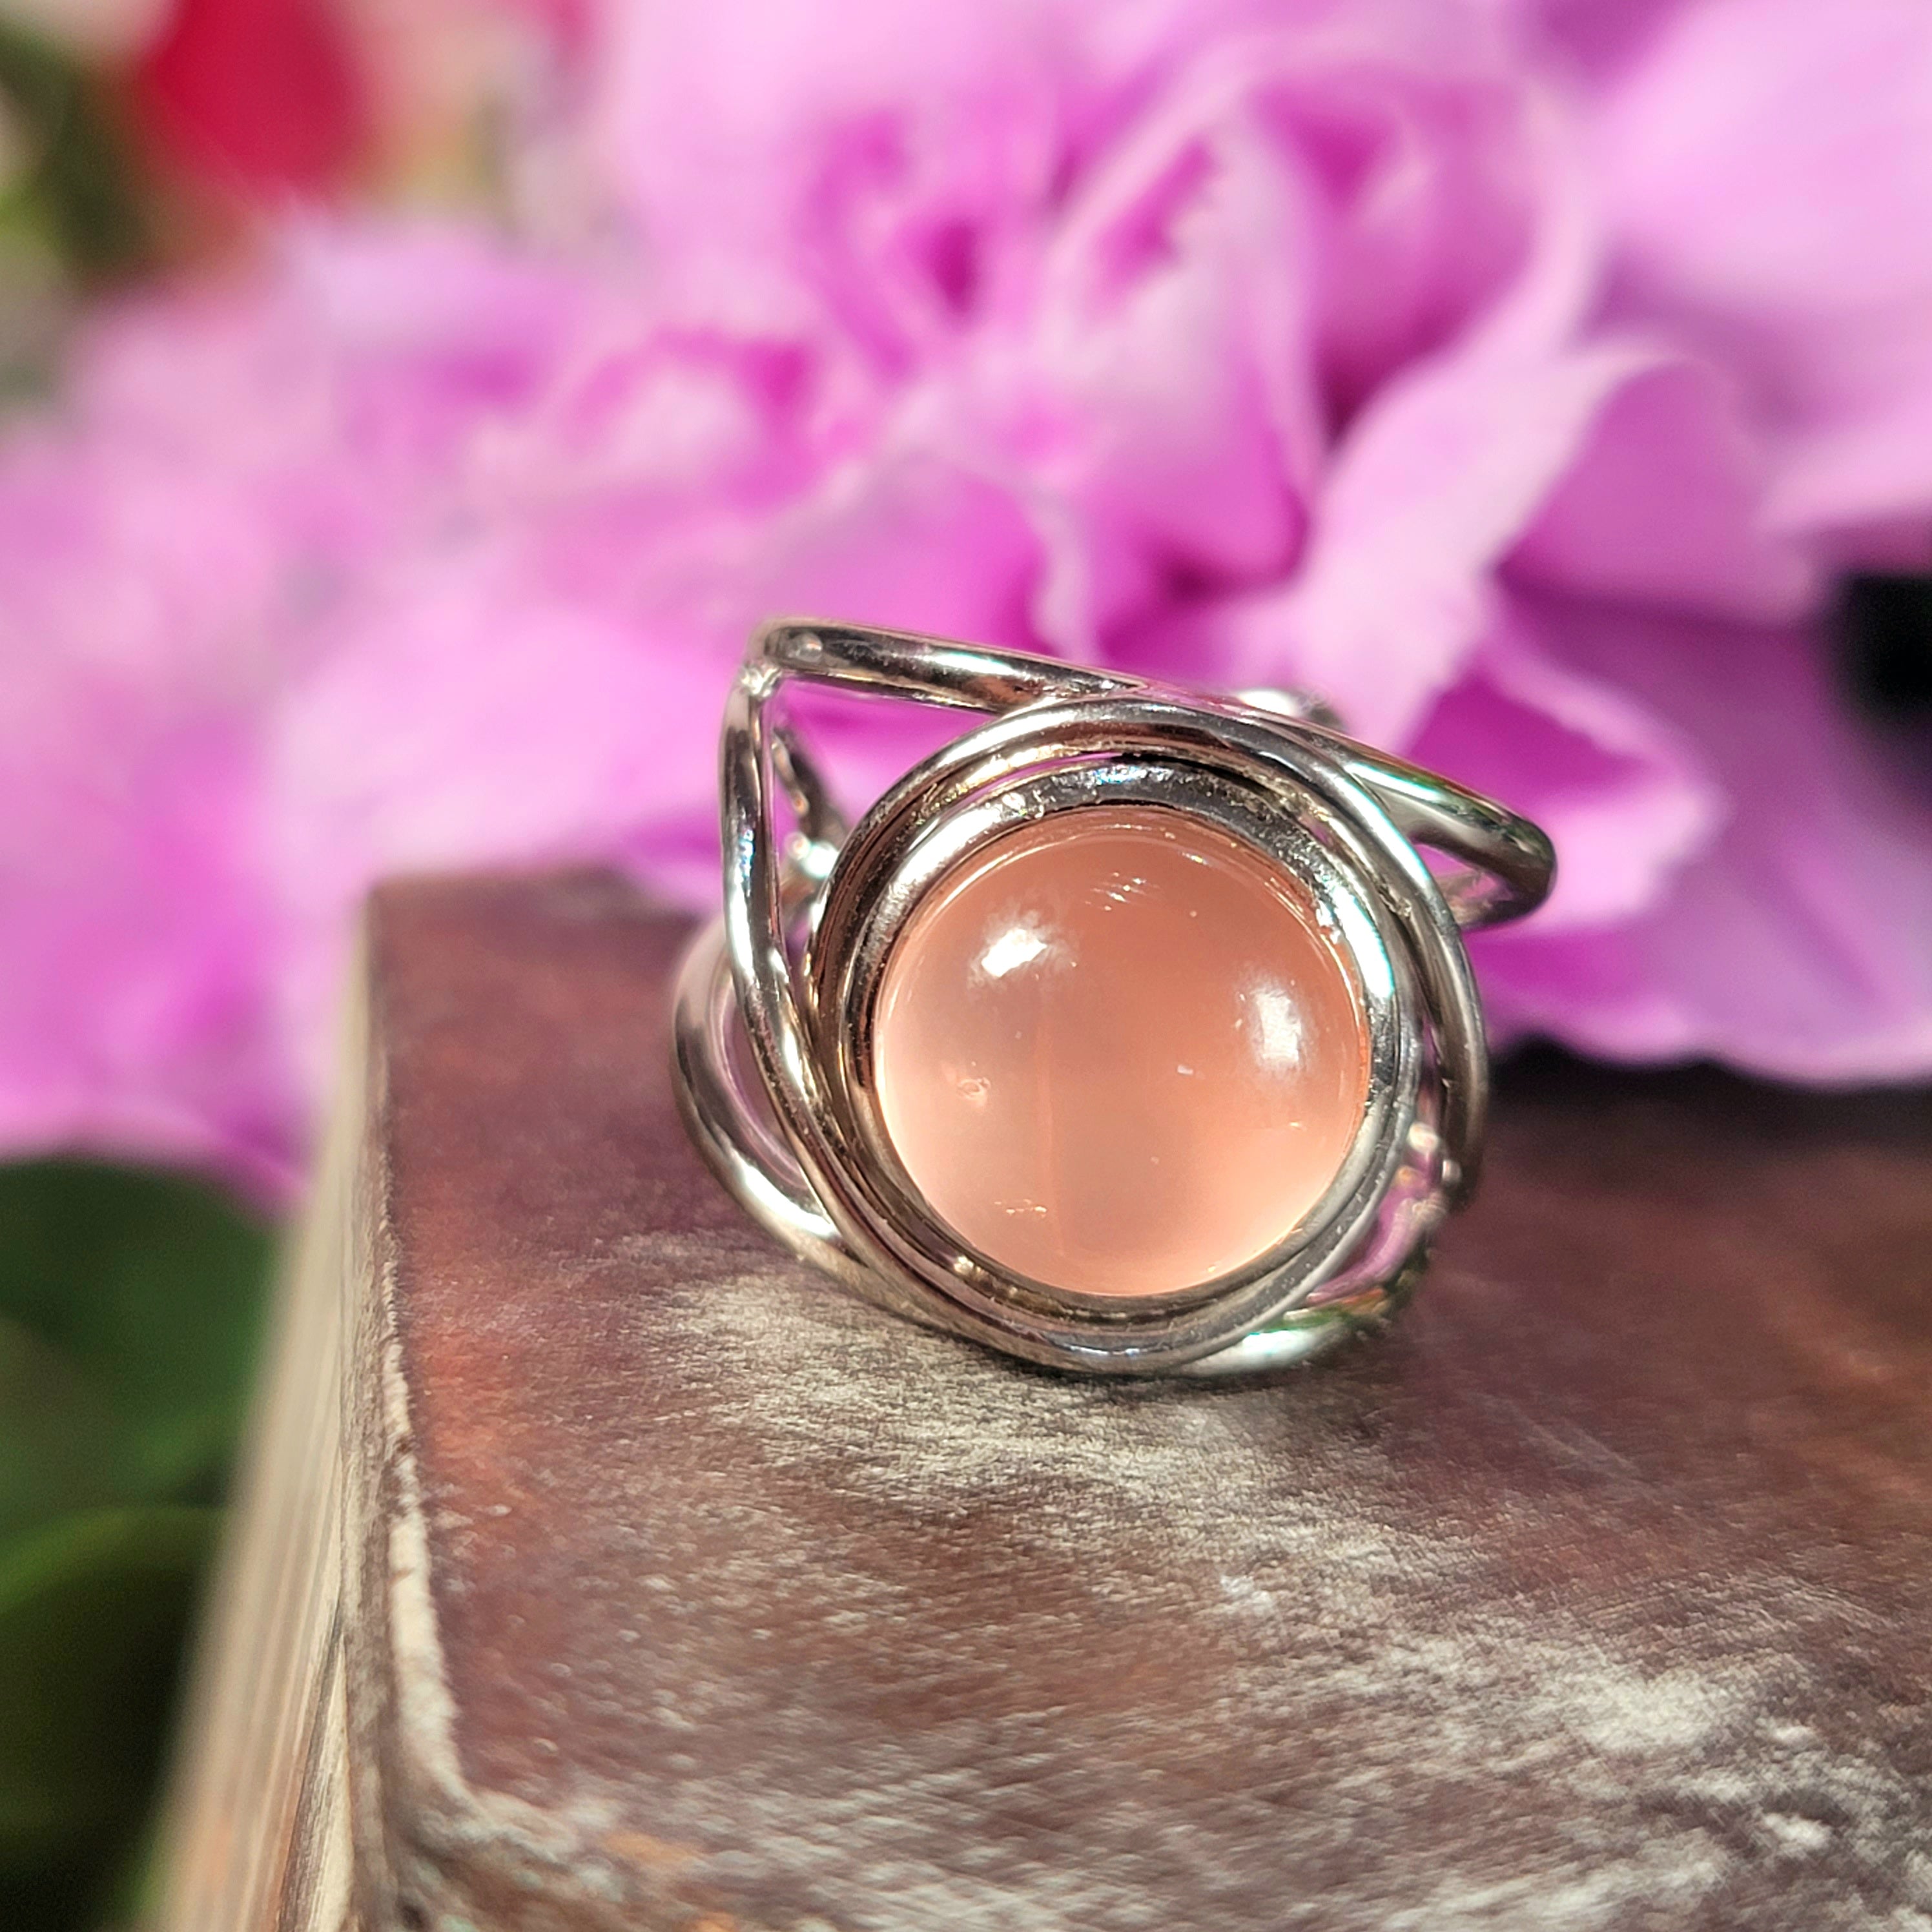 Star Rose Quartz Adjustable Finger Cuff Ring .925 Silver for Compassion and Self Love